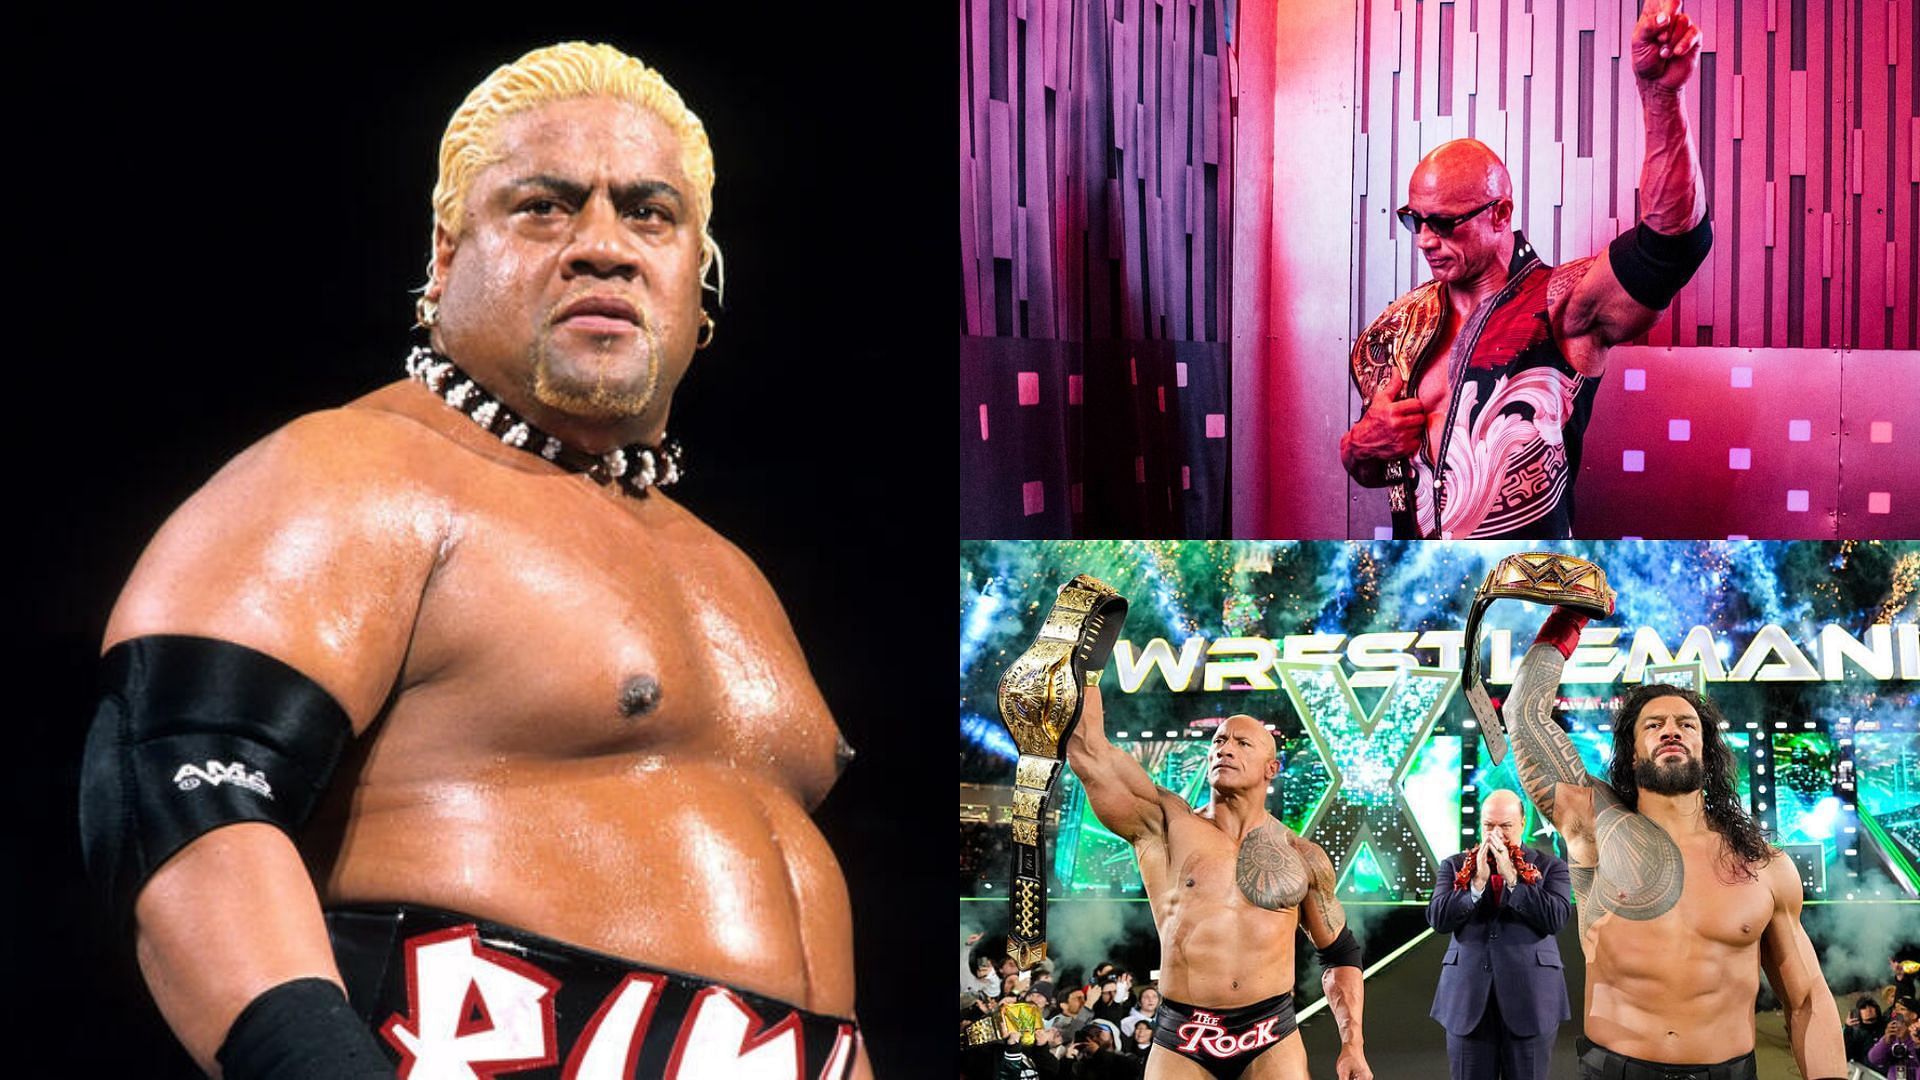 Rikishi and The Rock are real-life Bloodline (Anoa